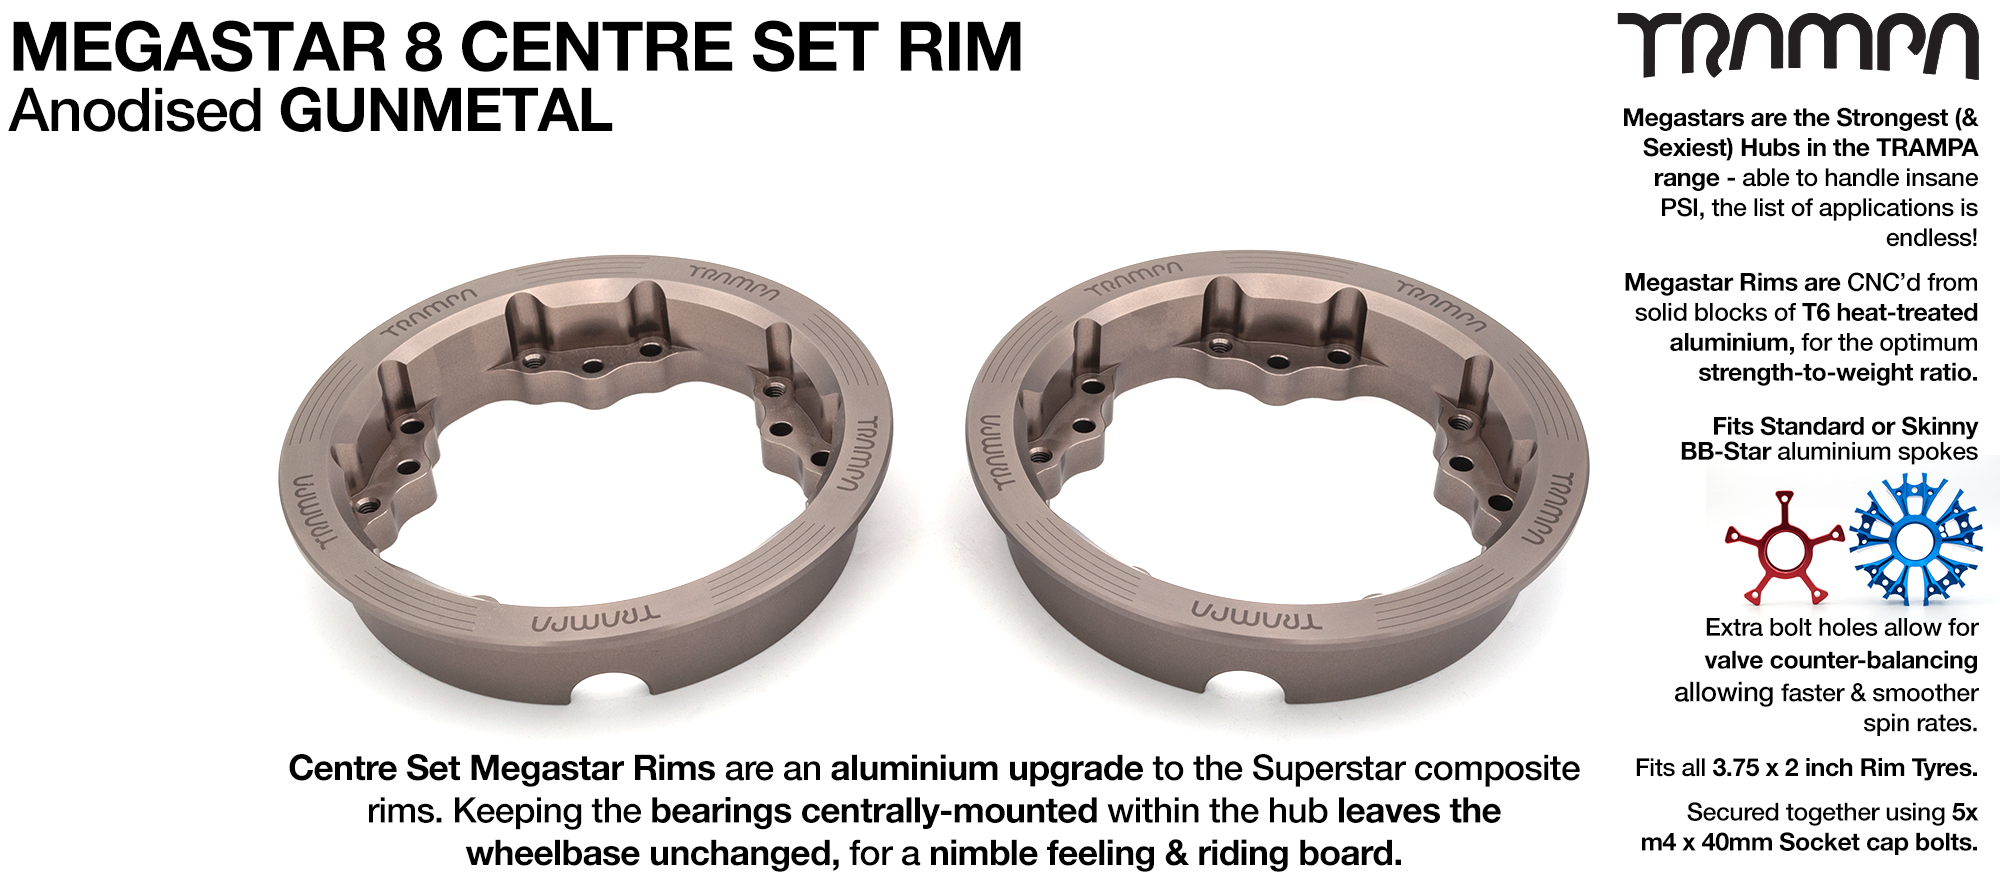 MEGASTAR 8 CS Rims Measure 3.75 x 2 Inch. The bearings are positioned CENTRE-SET & accept all 3.75 Rim Tyres - GUNMETAL